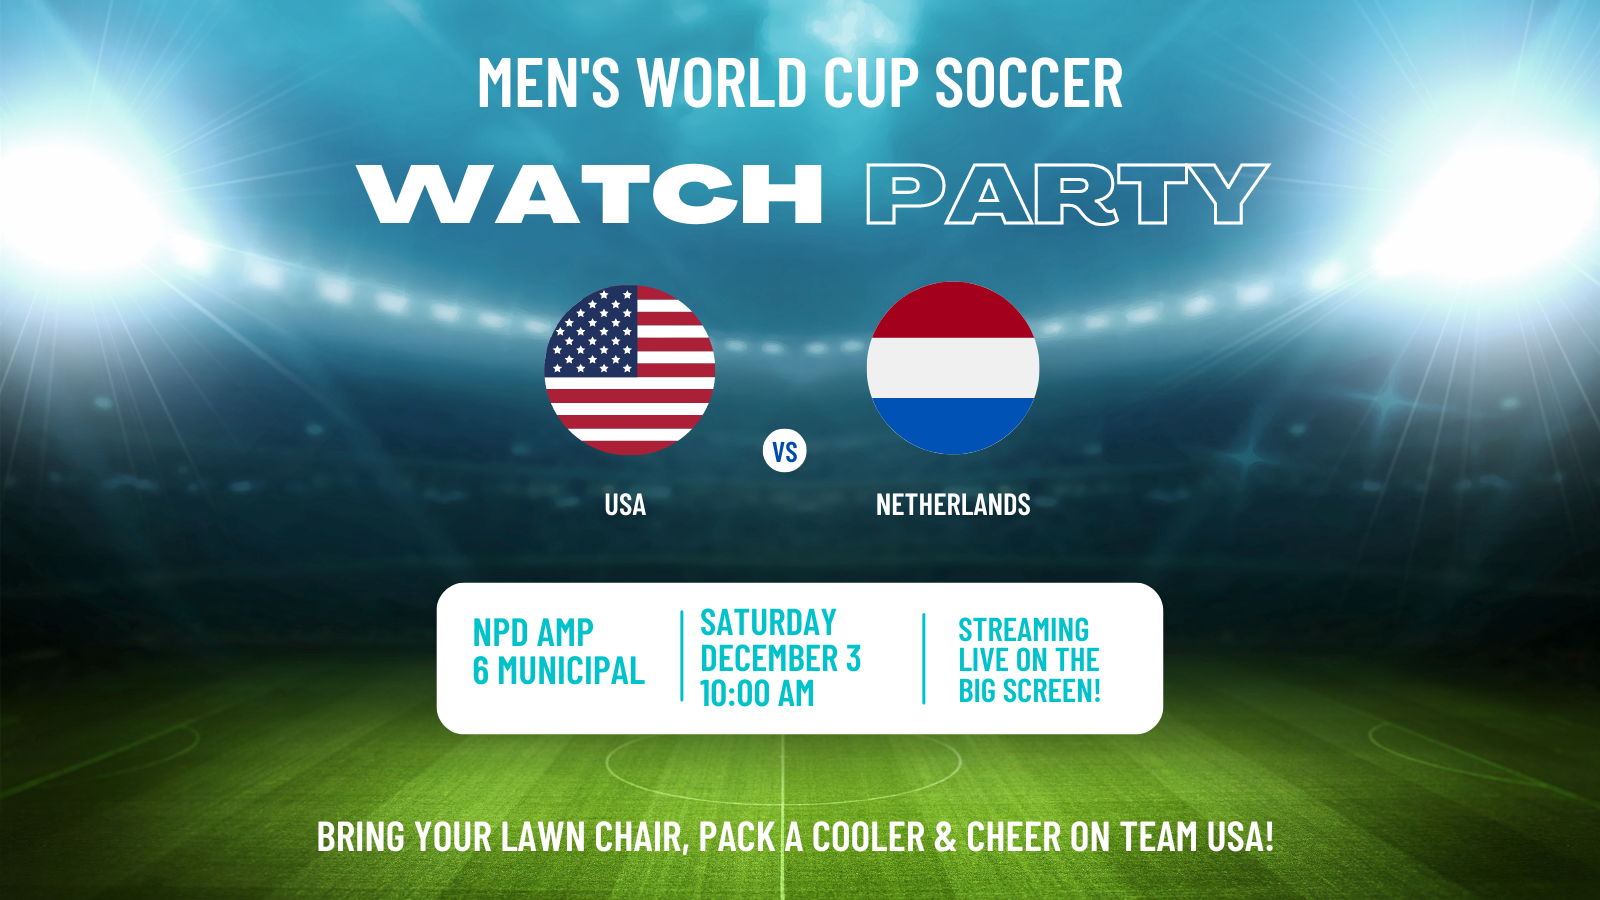 Men's World Cup Soccer Watch Party